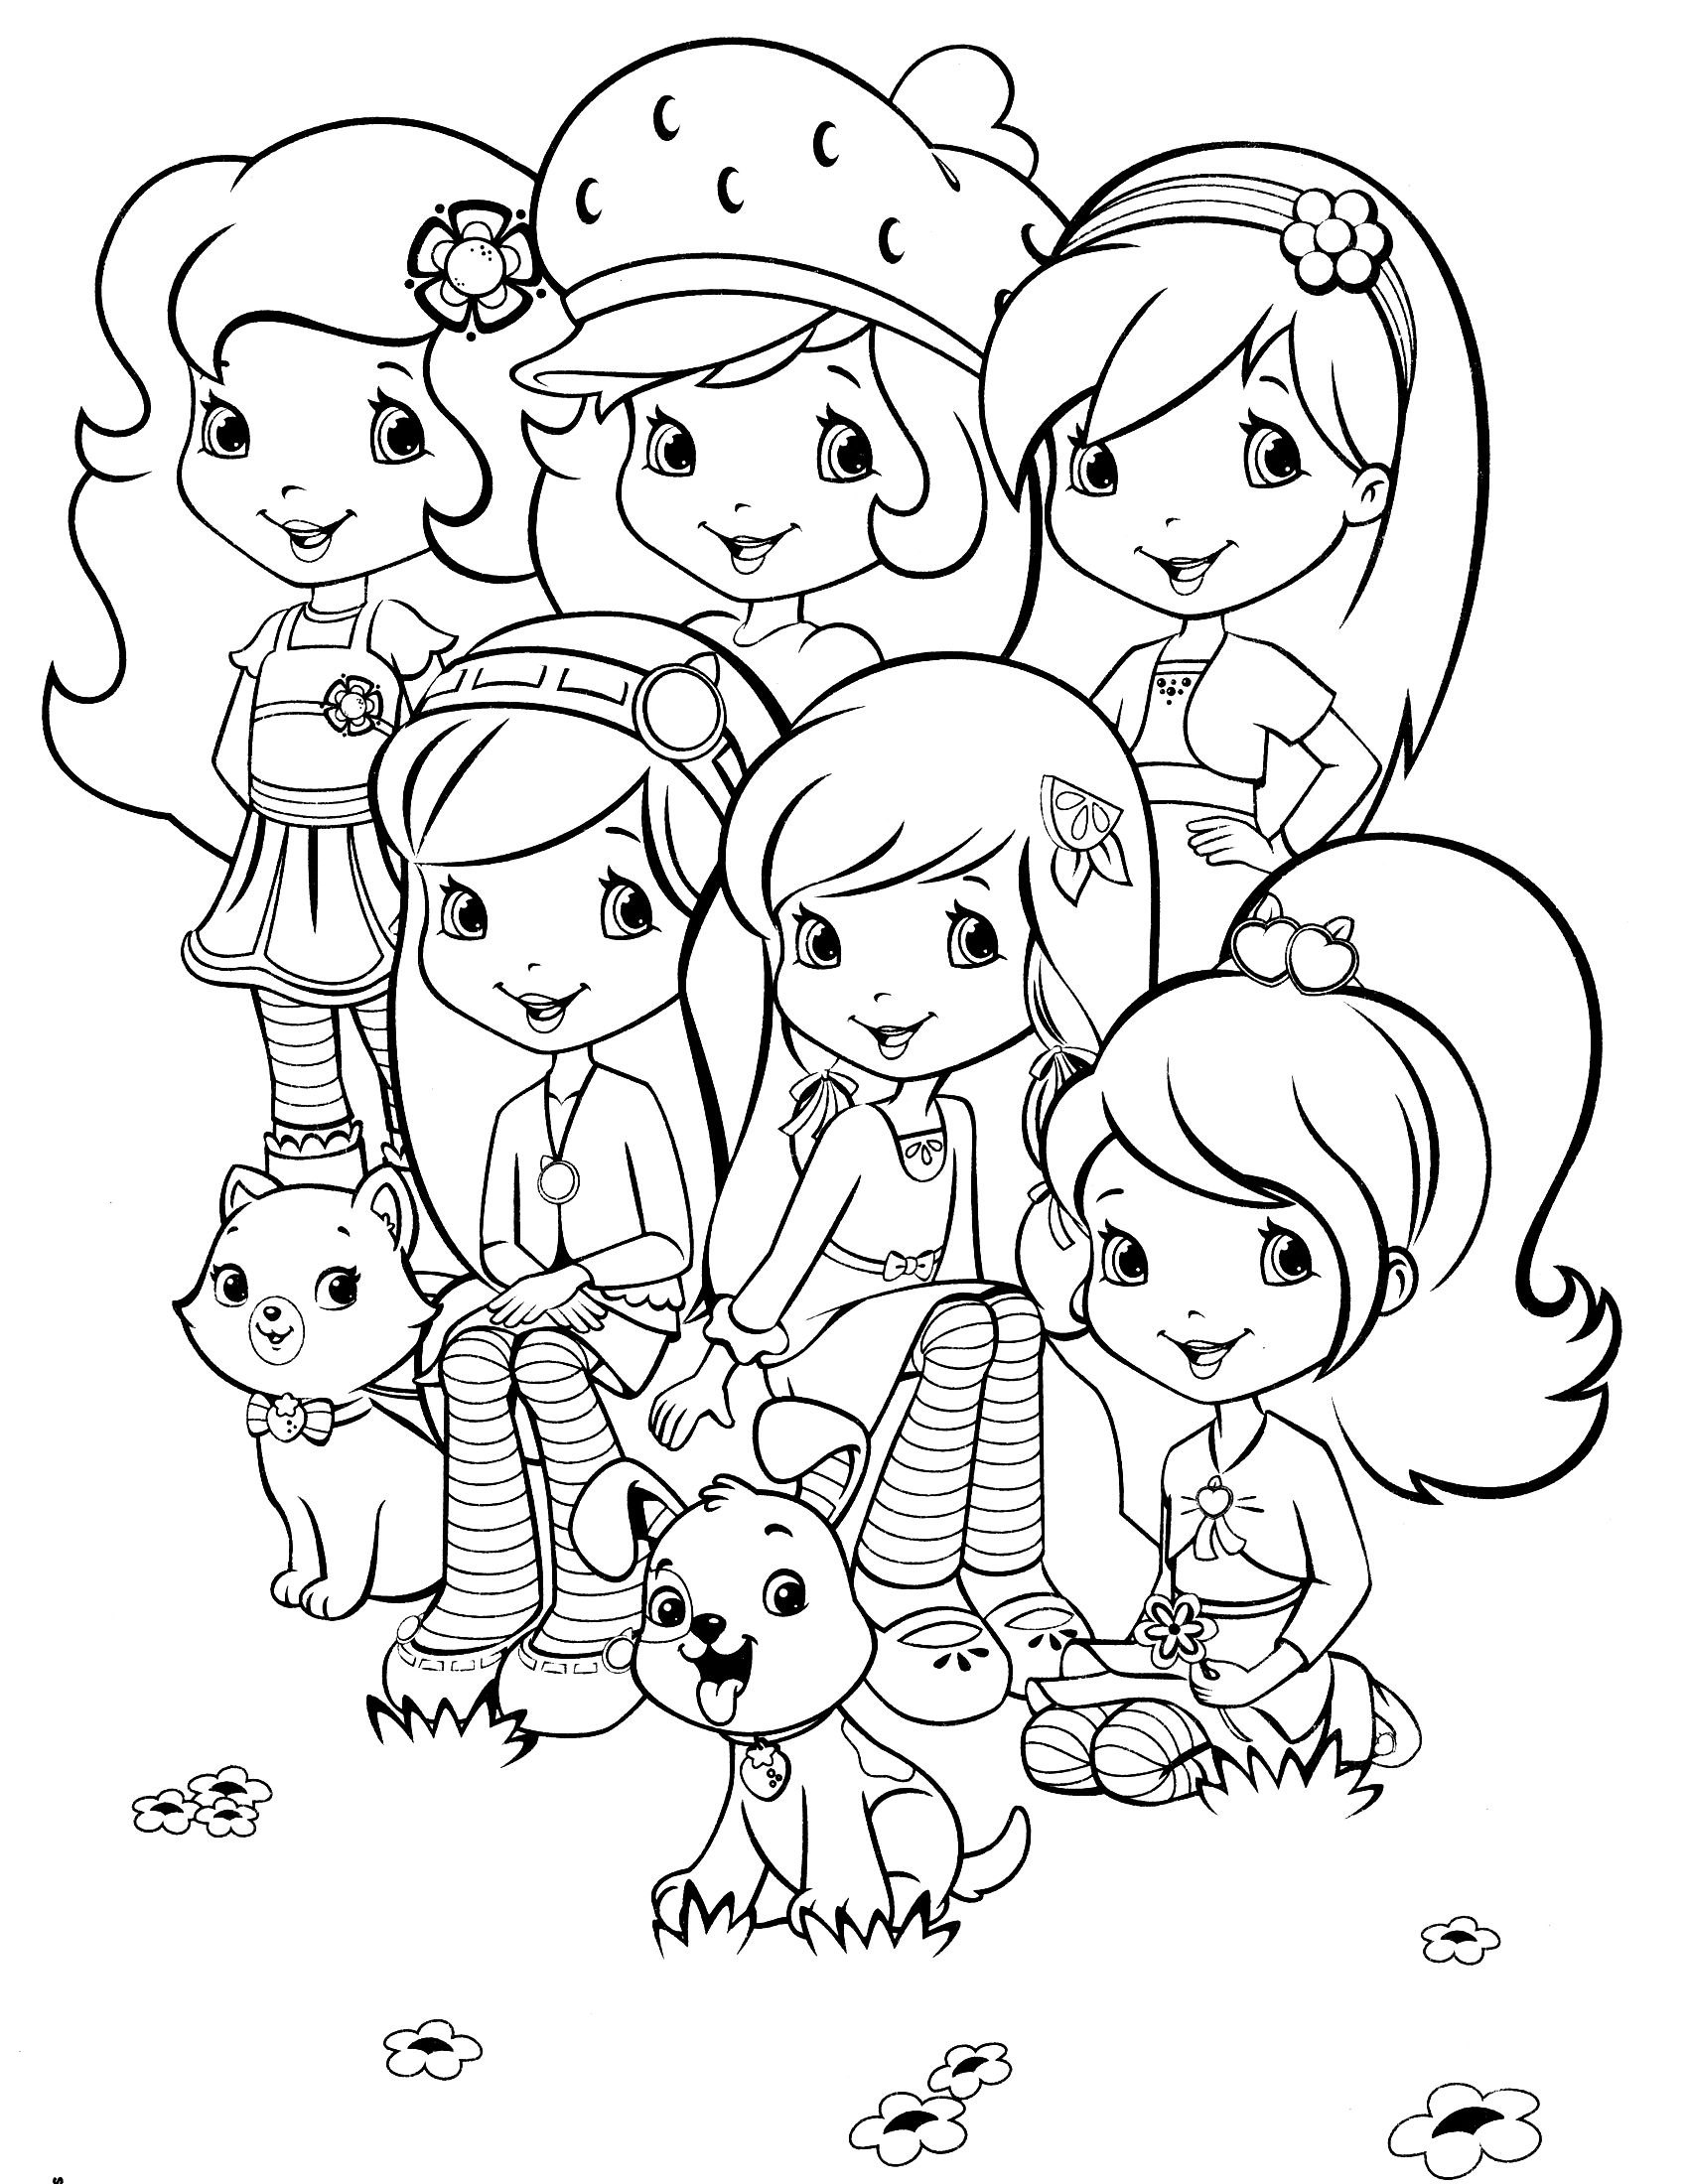 Strawberry Shortcake Coloring Pages To Print